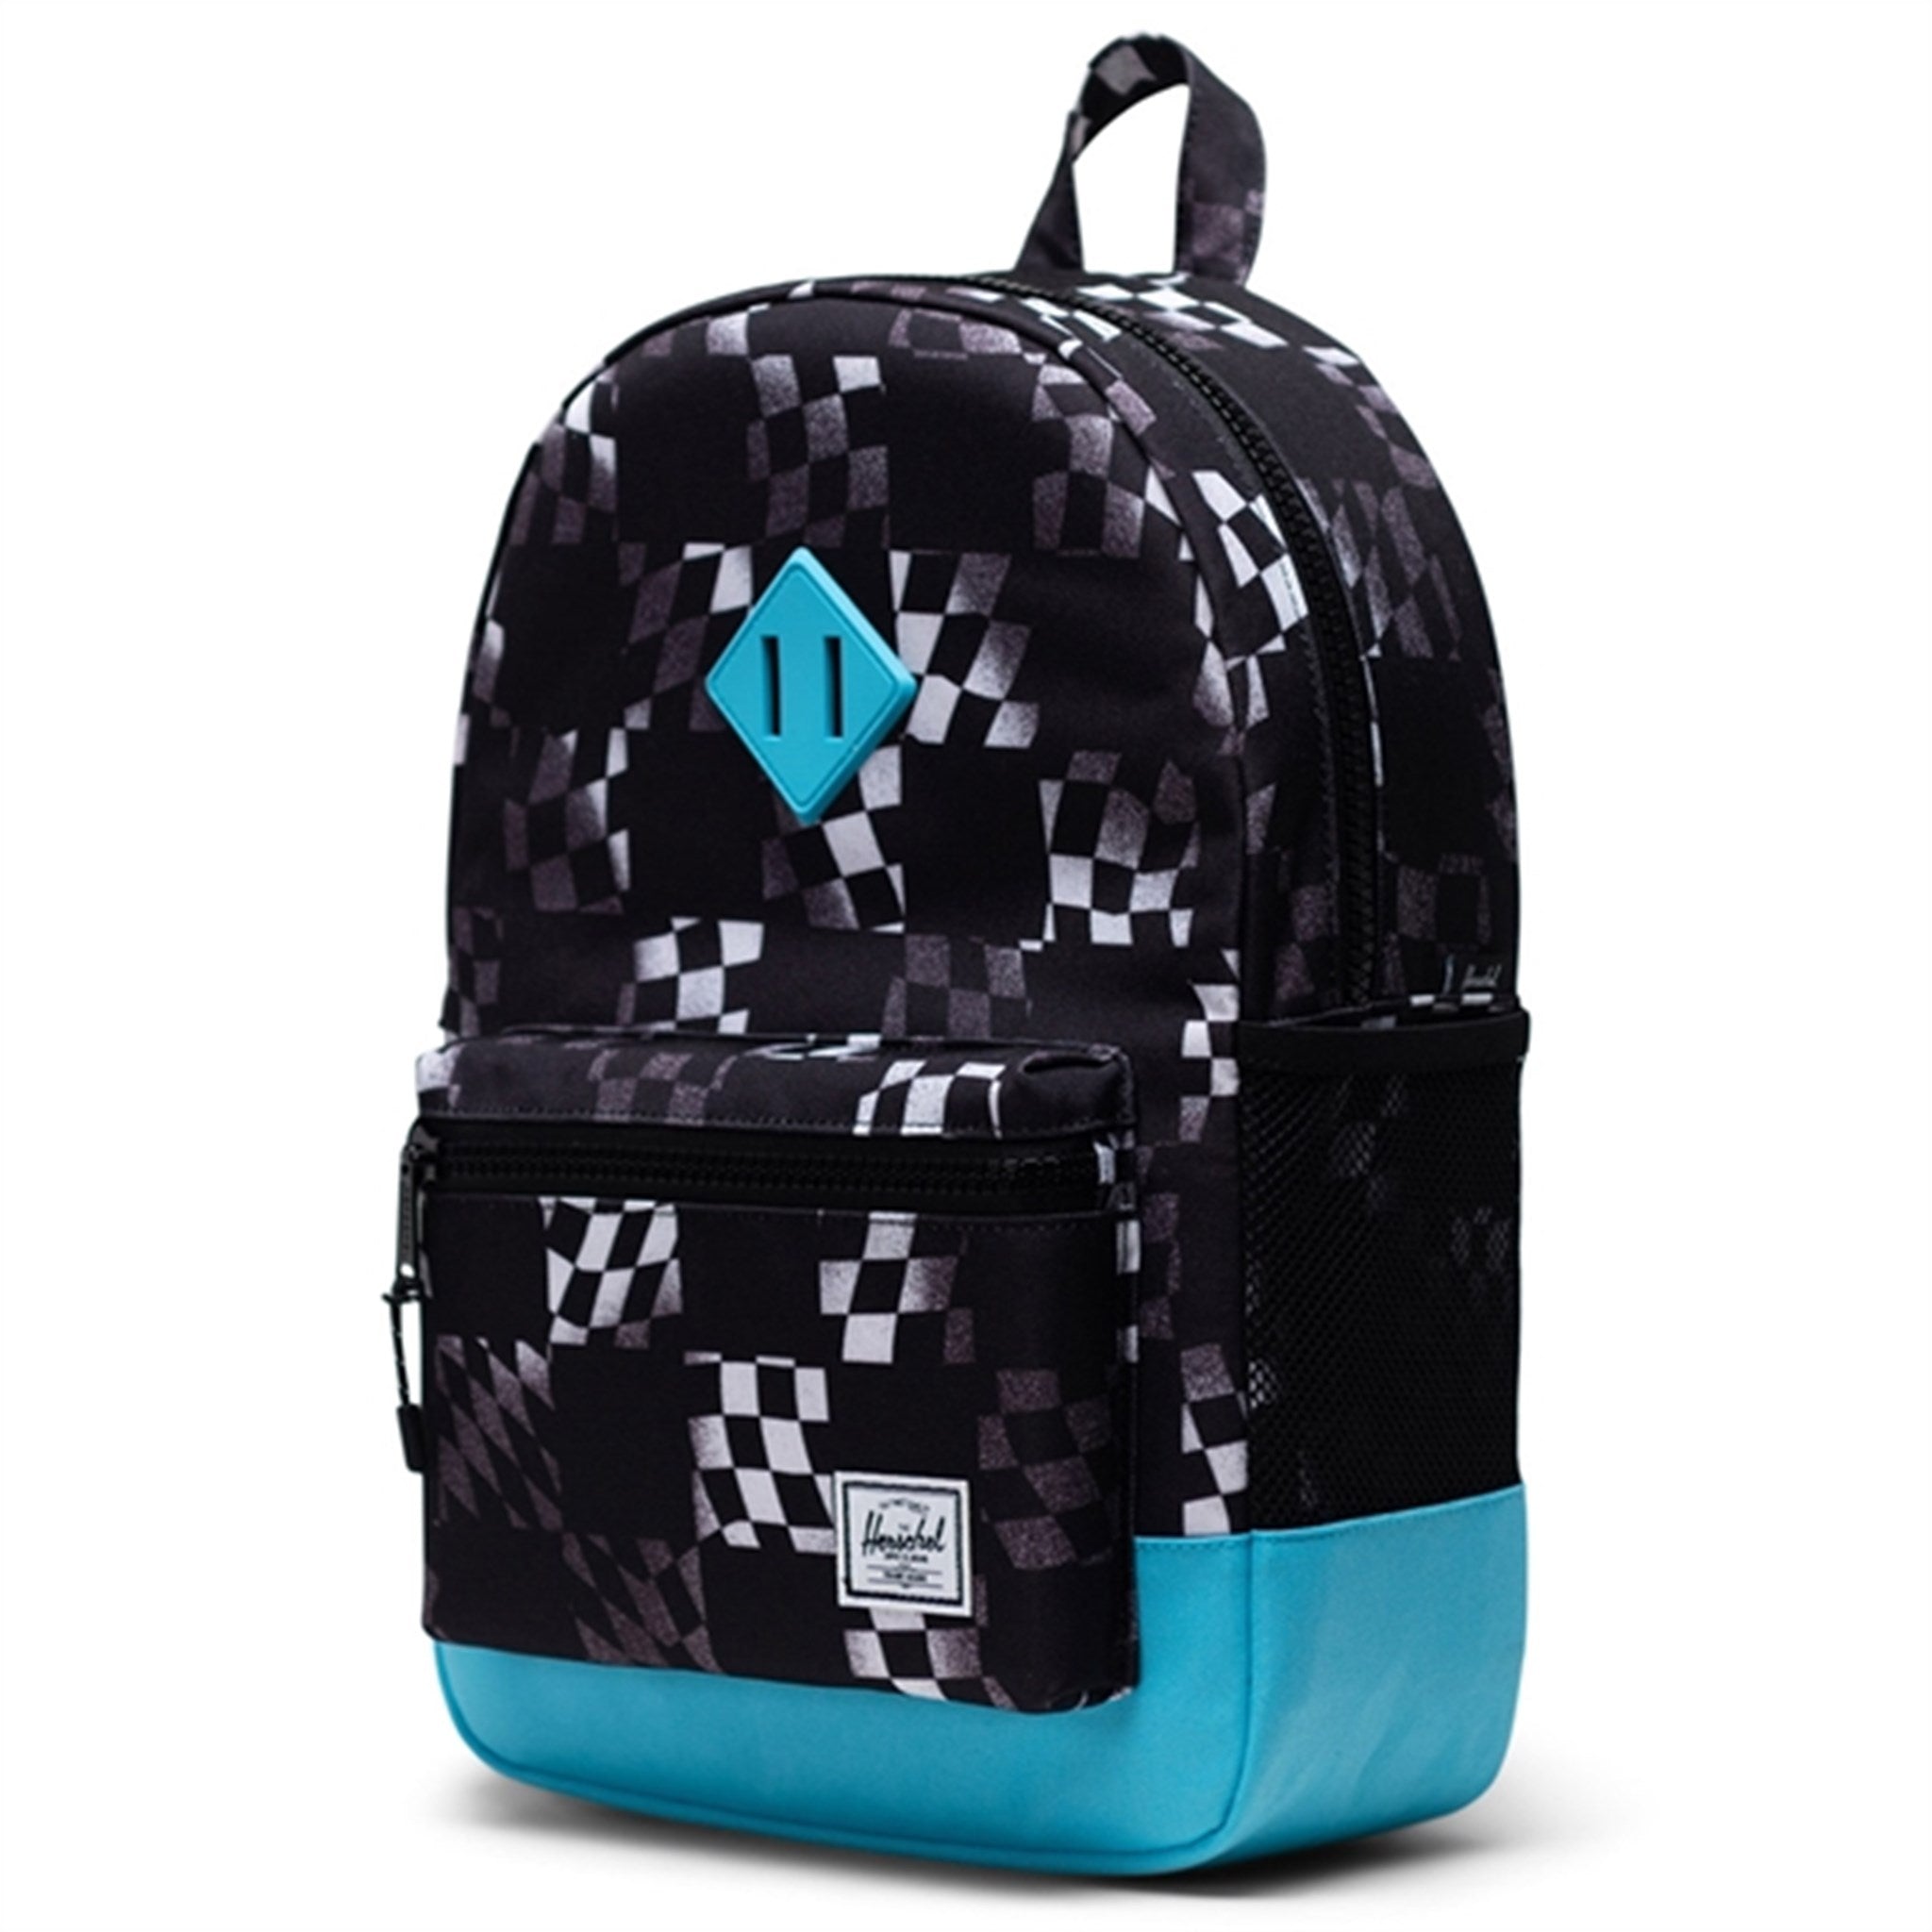 Herschel Heritage Youth Backpack Race Check 3